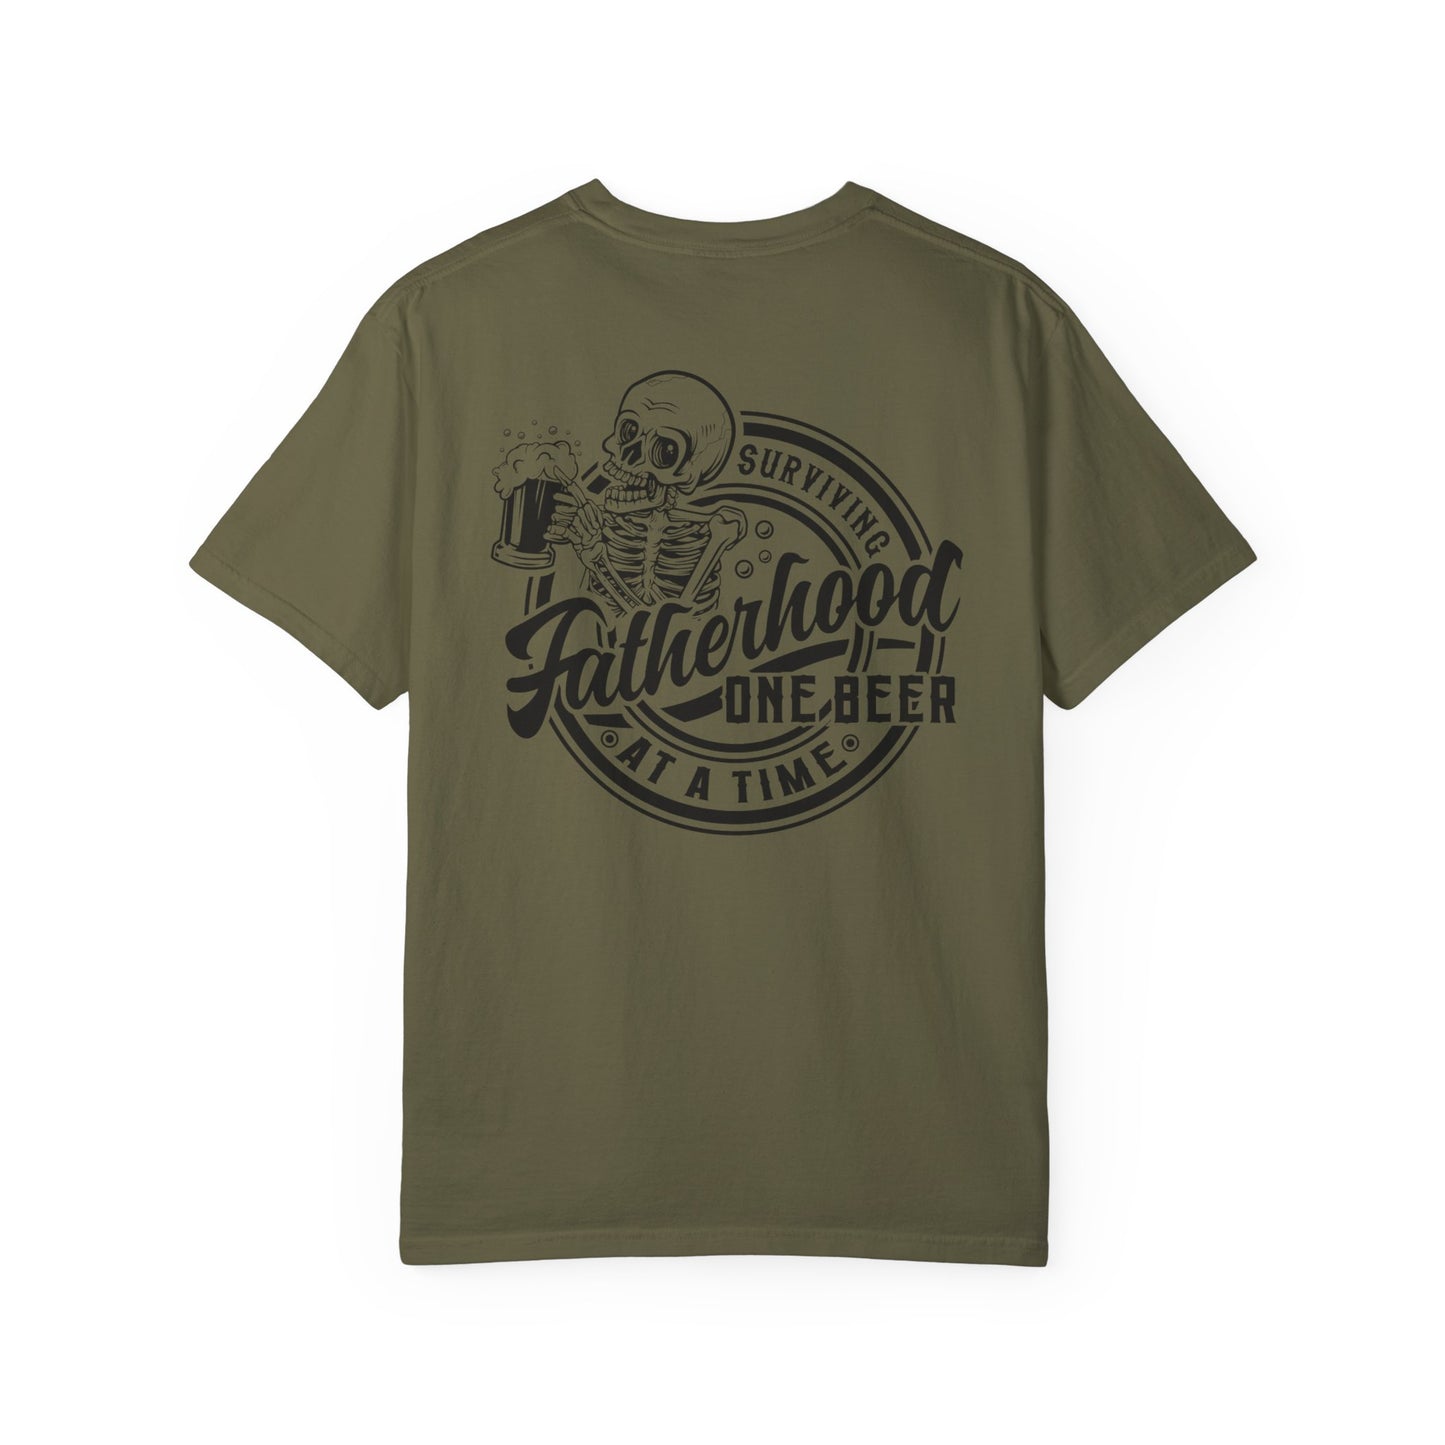 Fatherhood one beer at a time T-shirt